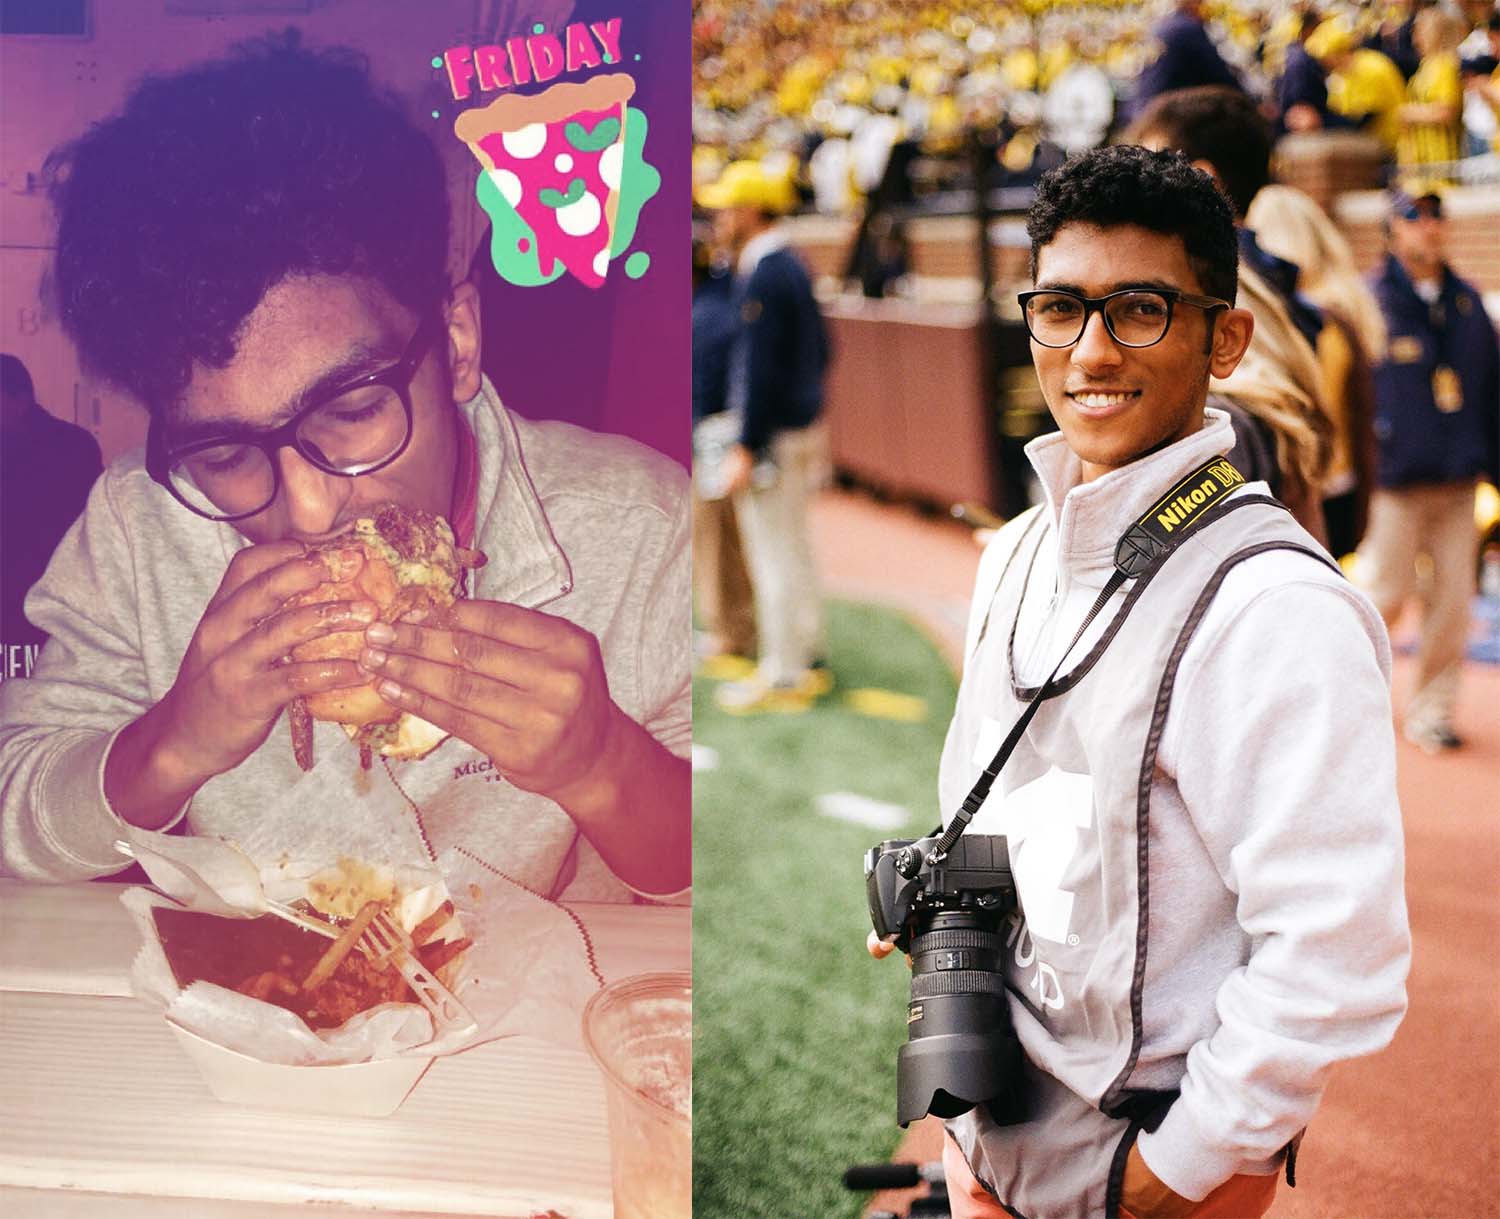 Tejas Harith eating (left image) and on the field in the Big House on game day as a photographer